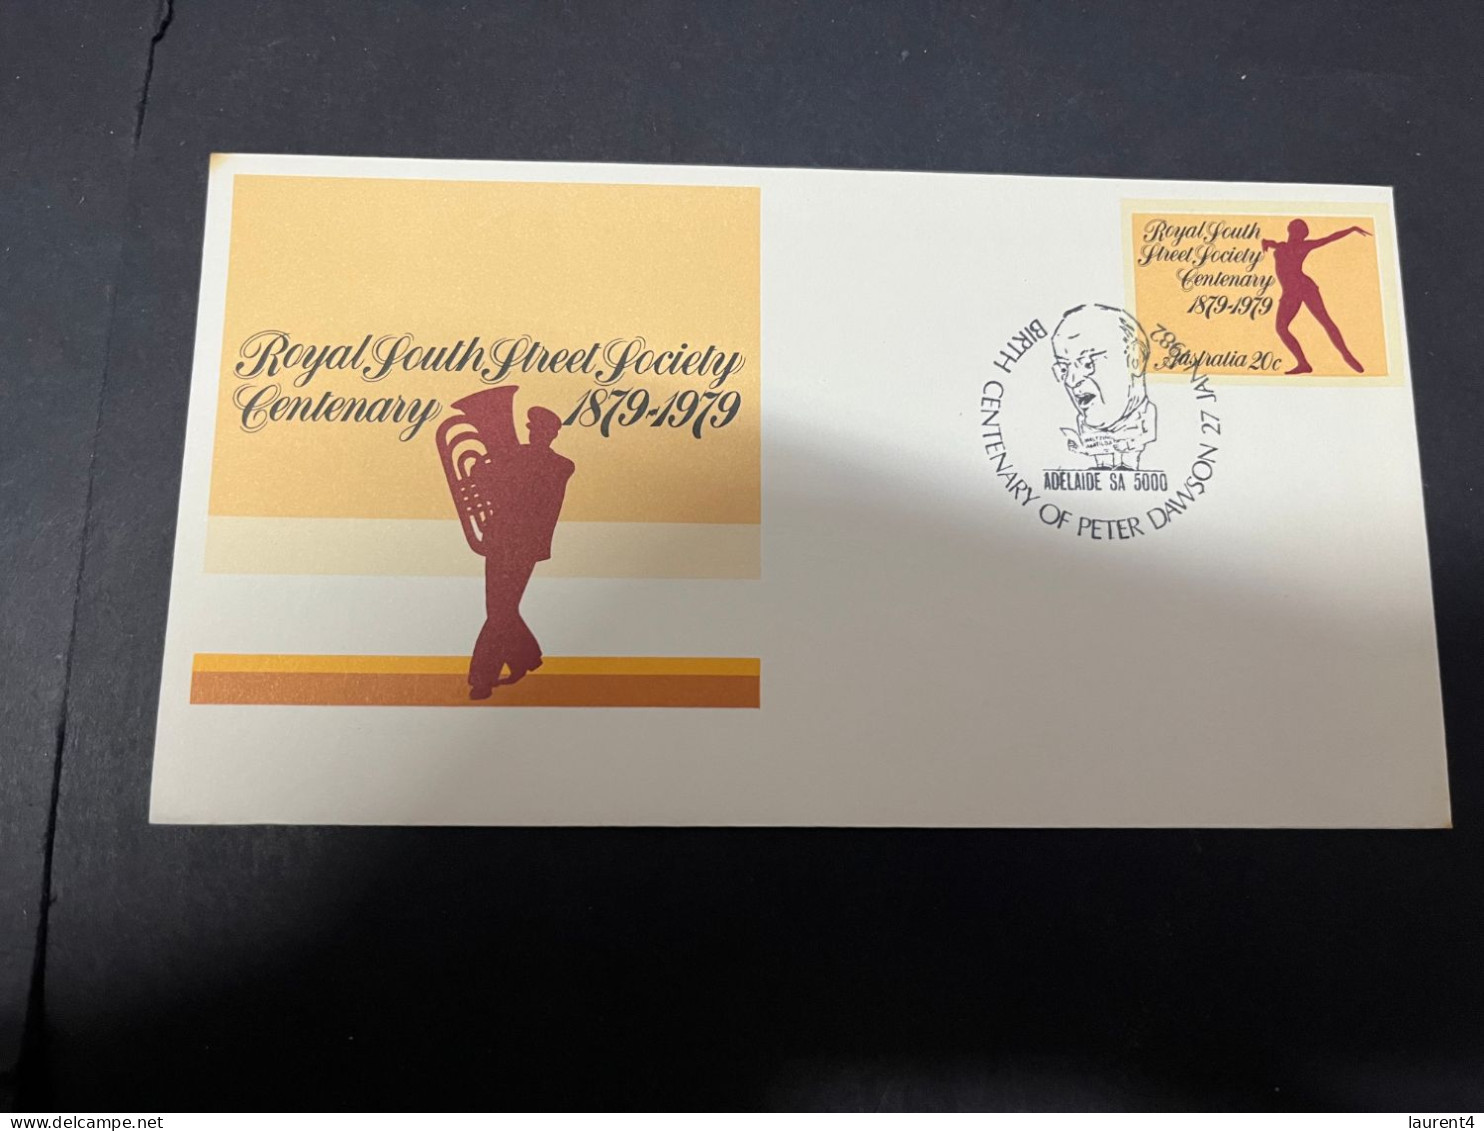 26-4-2024 (3 Z 9) Australia FDC - 1982 - Centenary Of Peter Dawson (special P/m) 2 Covers - Premiers Jours (FDC)